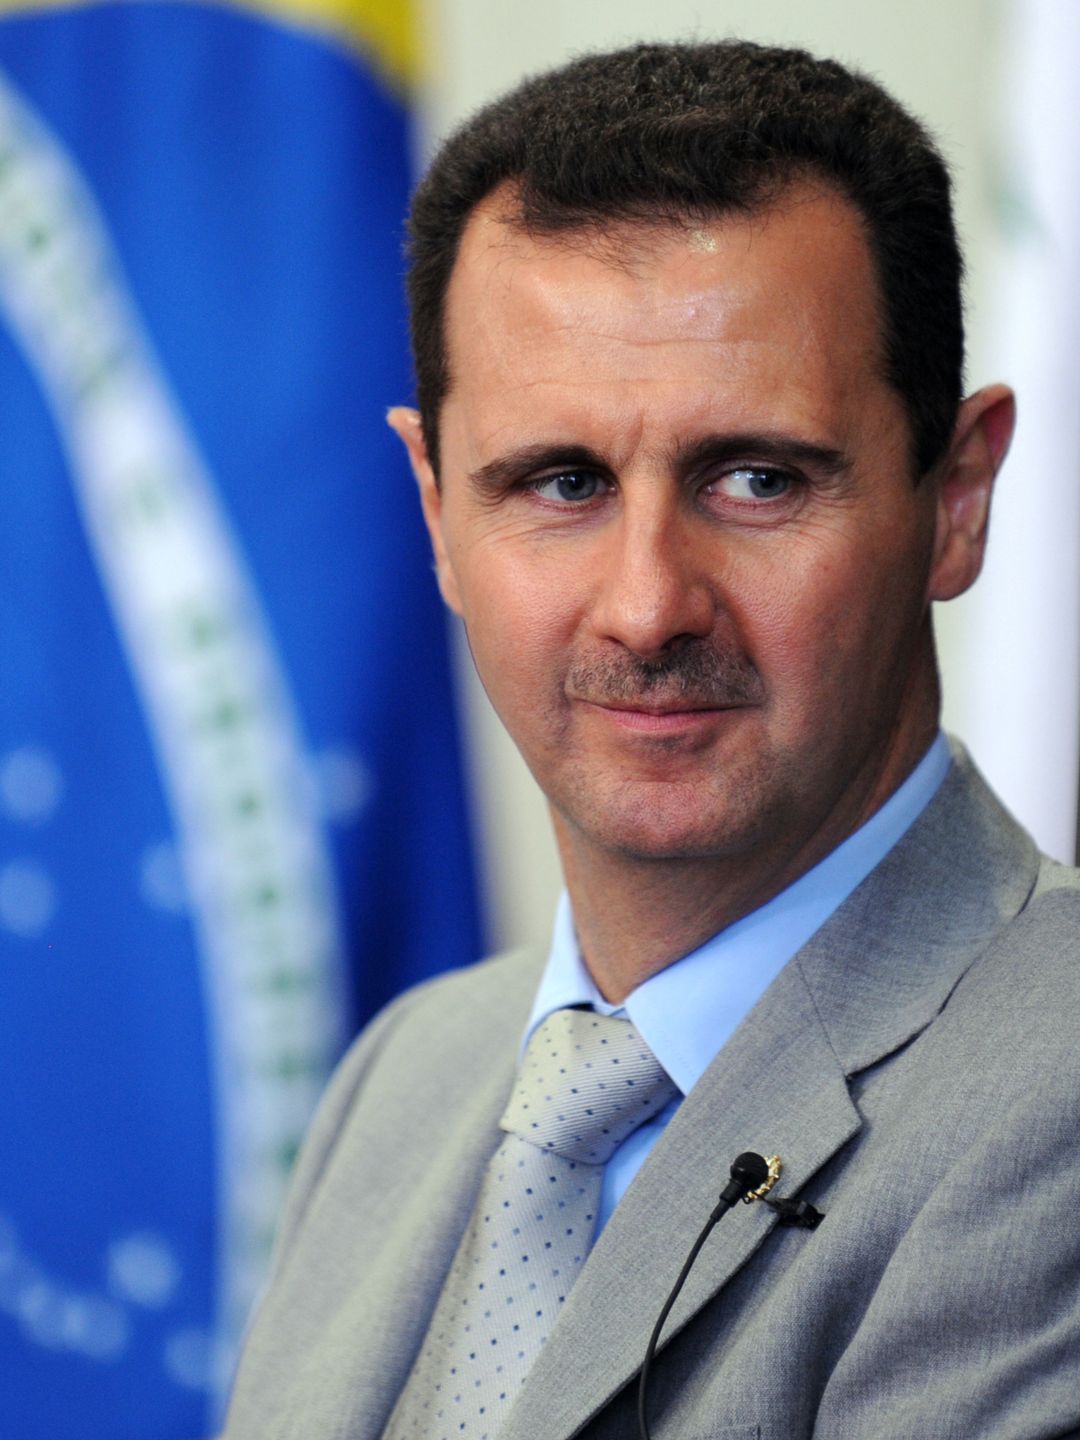 Bashar Assad who is his mother